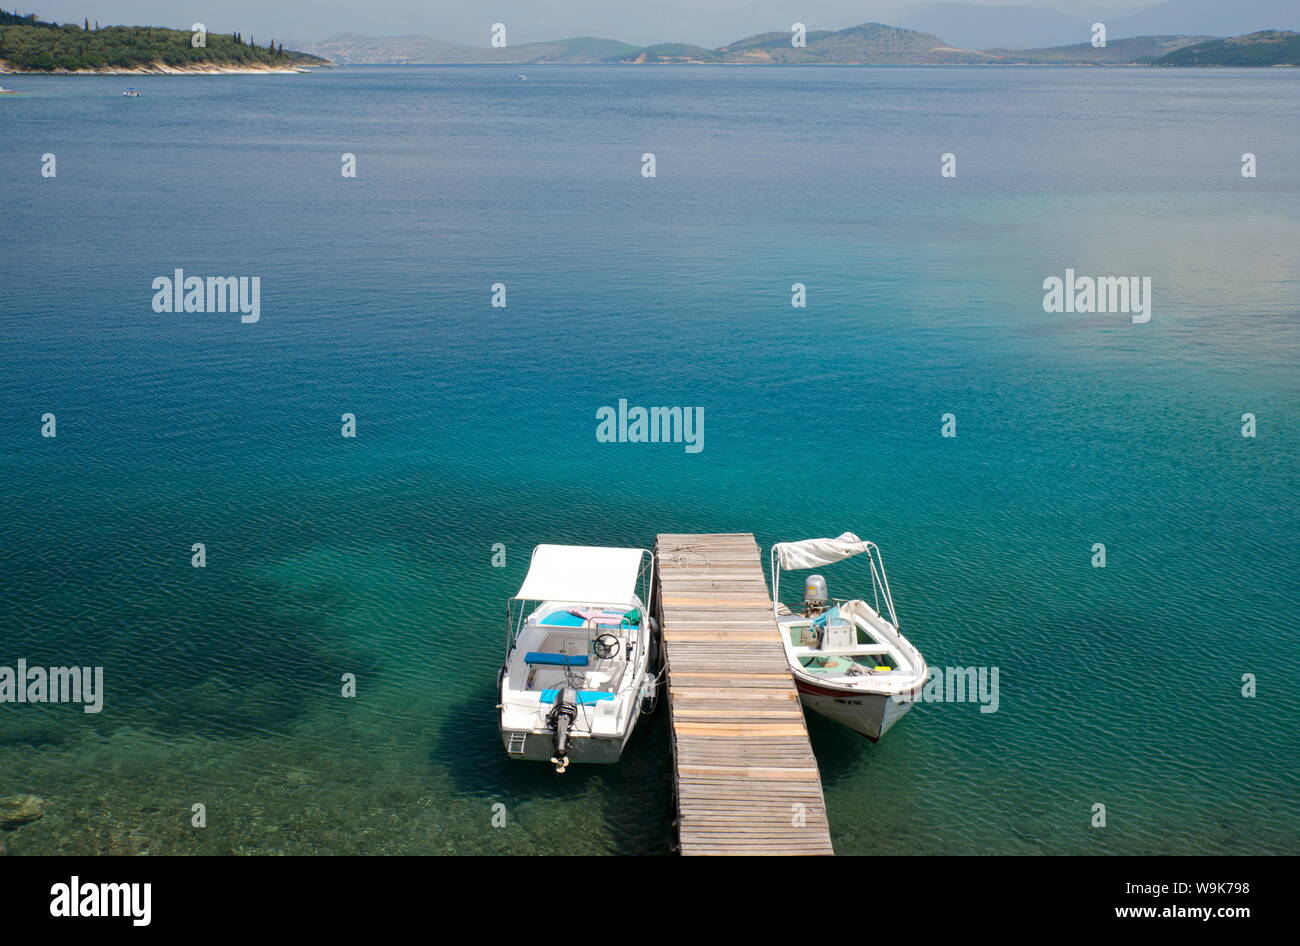 Speedboats tied up at a dock in Kouloura Harbour on the northeast coast of Corfu, Ionian Islands, Greek Islands, Greece, Europe Stock Photo